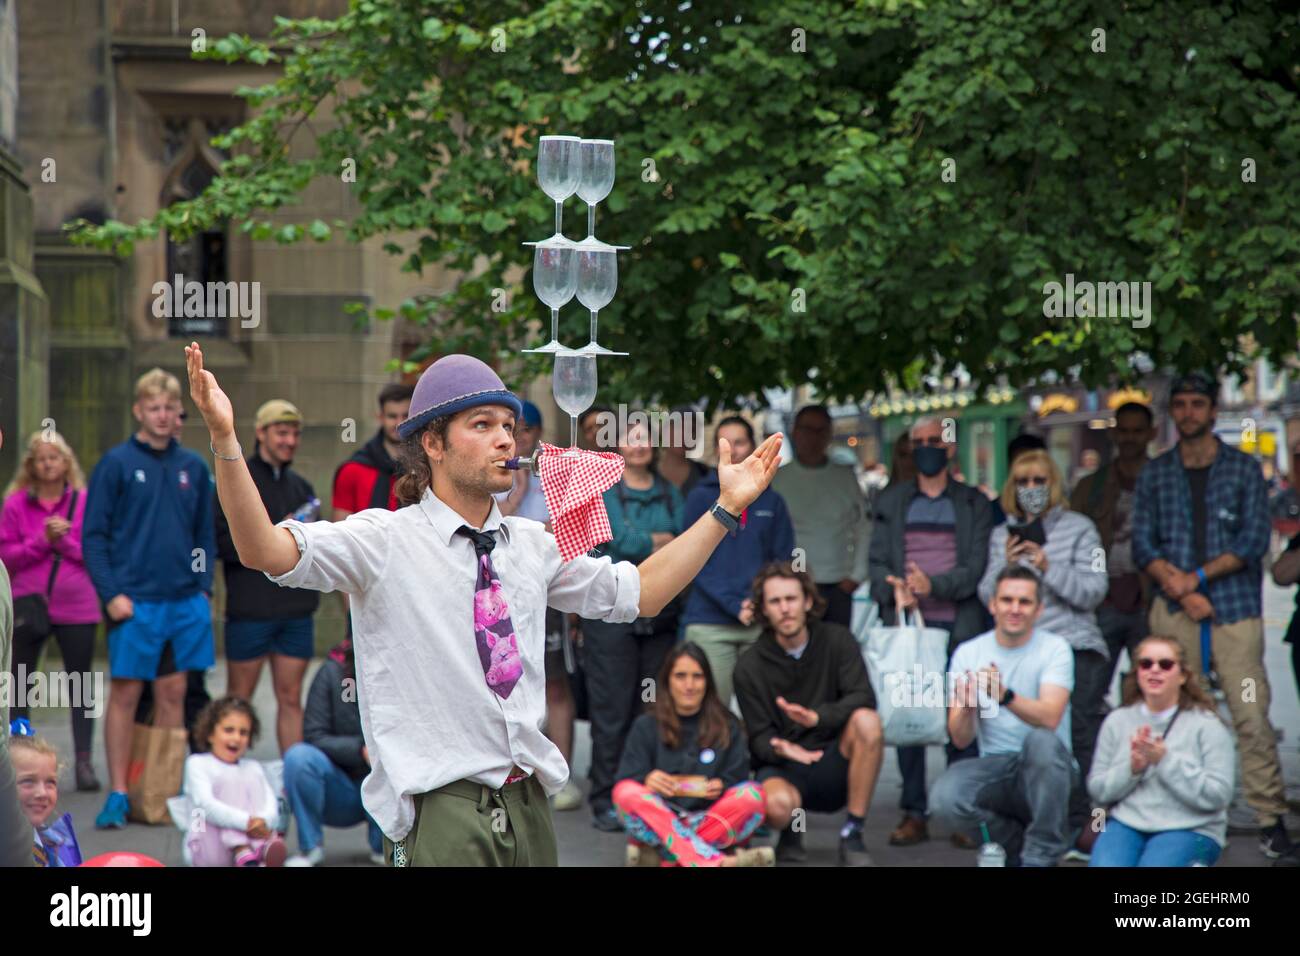 Edinburgh, Scotland, UK weather. 20 August 2021. Cloudy day for city centre and those seeking some enterainment from the various festivals in the city. Pictured: Timon street performer with his balancing act. Credit: Arch White/Alamy Live News Stock Photo